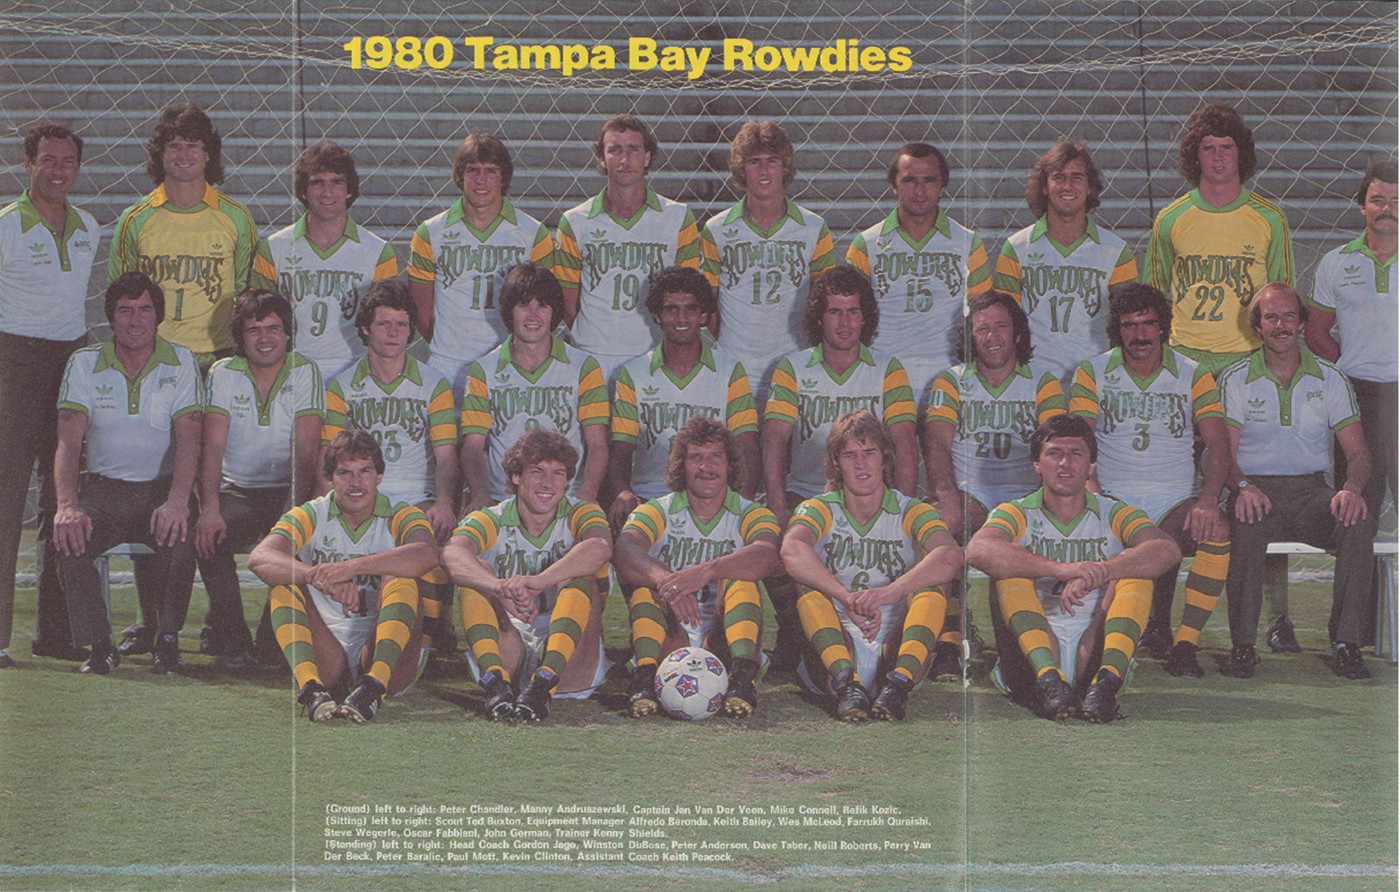 NASL Tampa Bay Rowdies Rosters1400 x 892